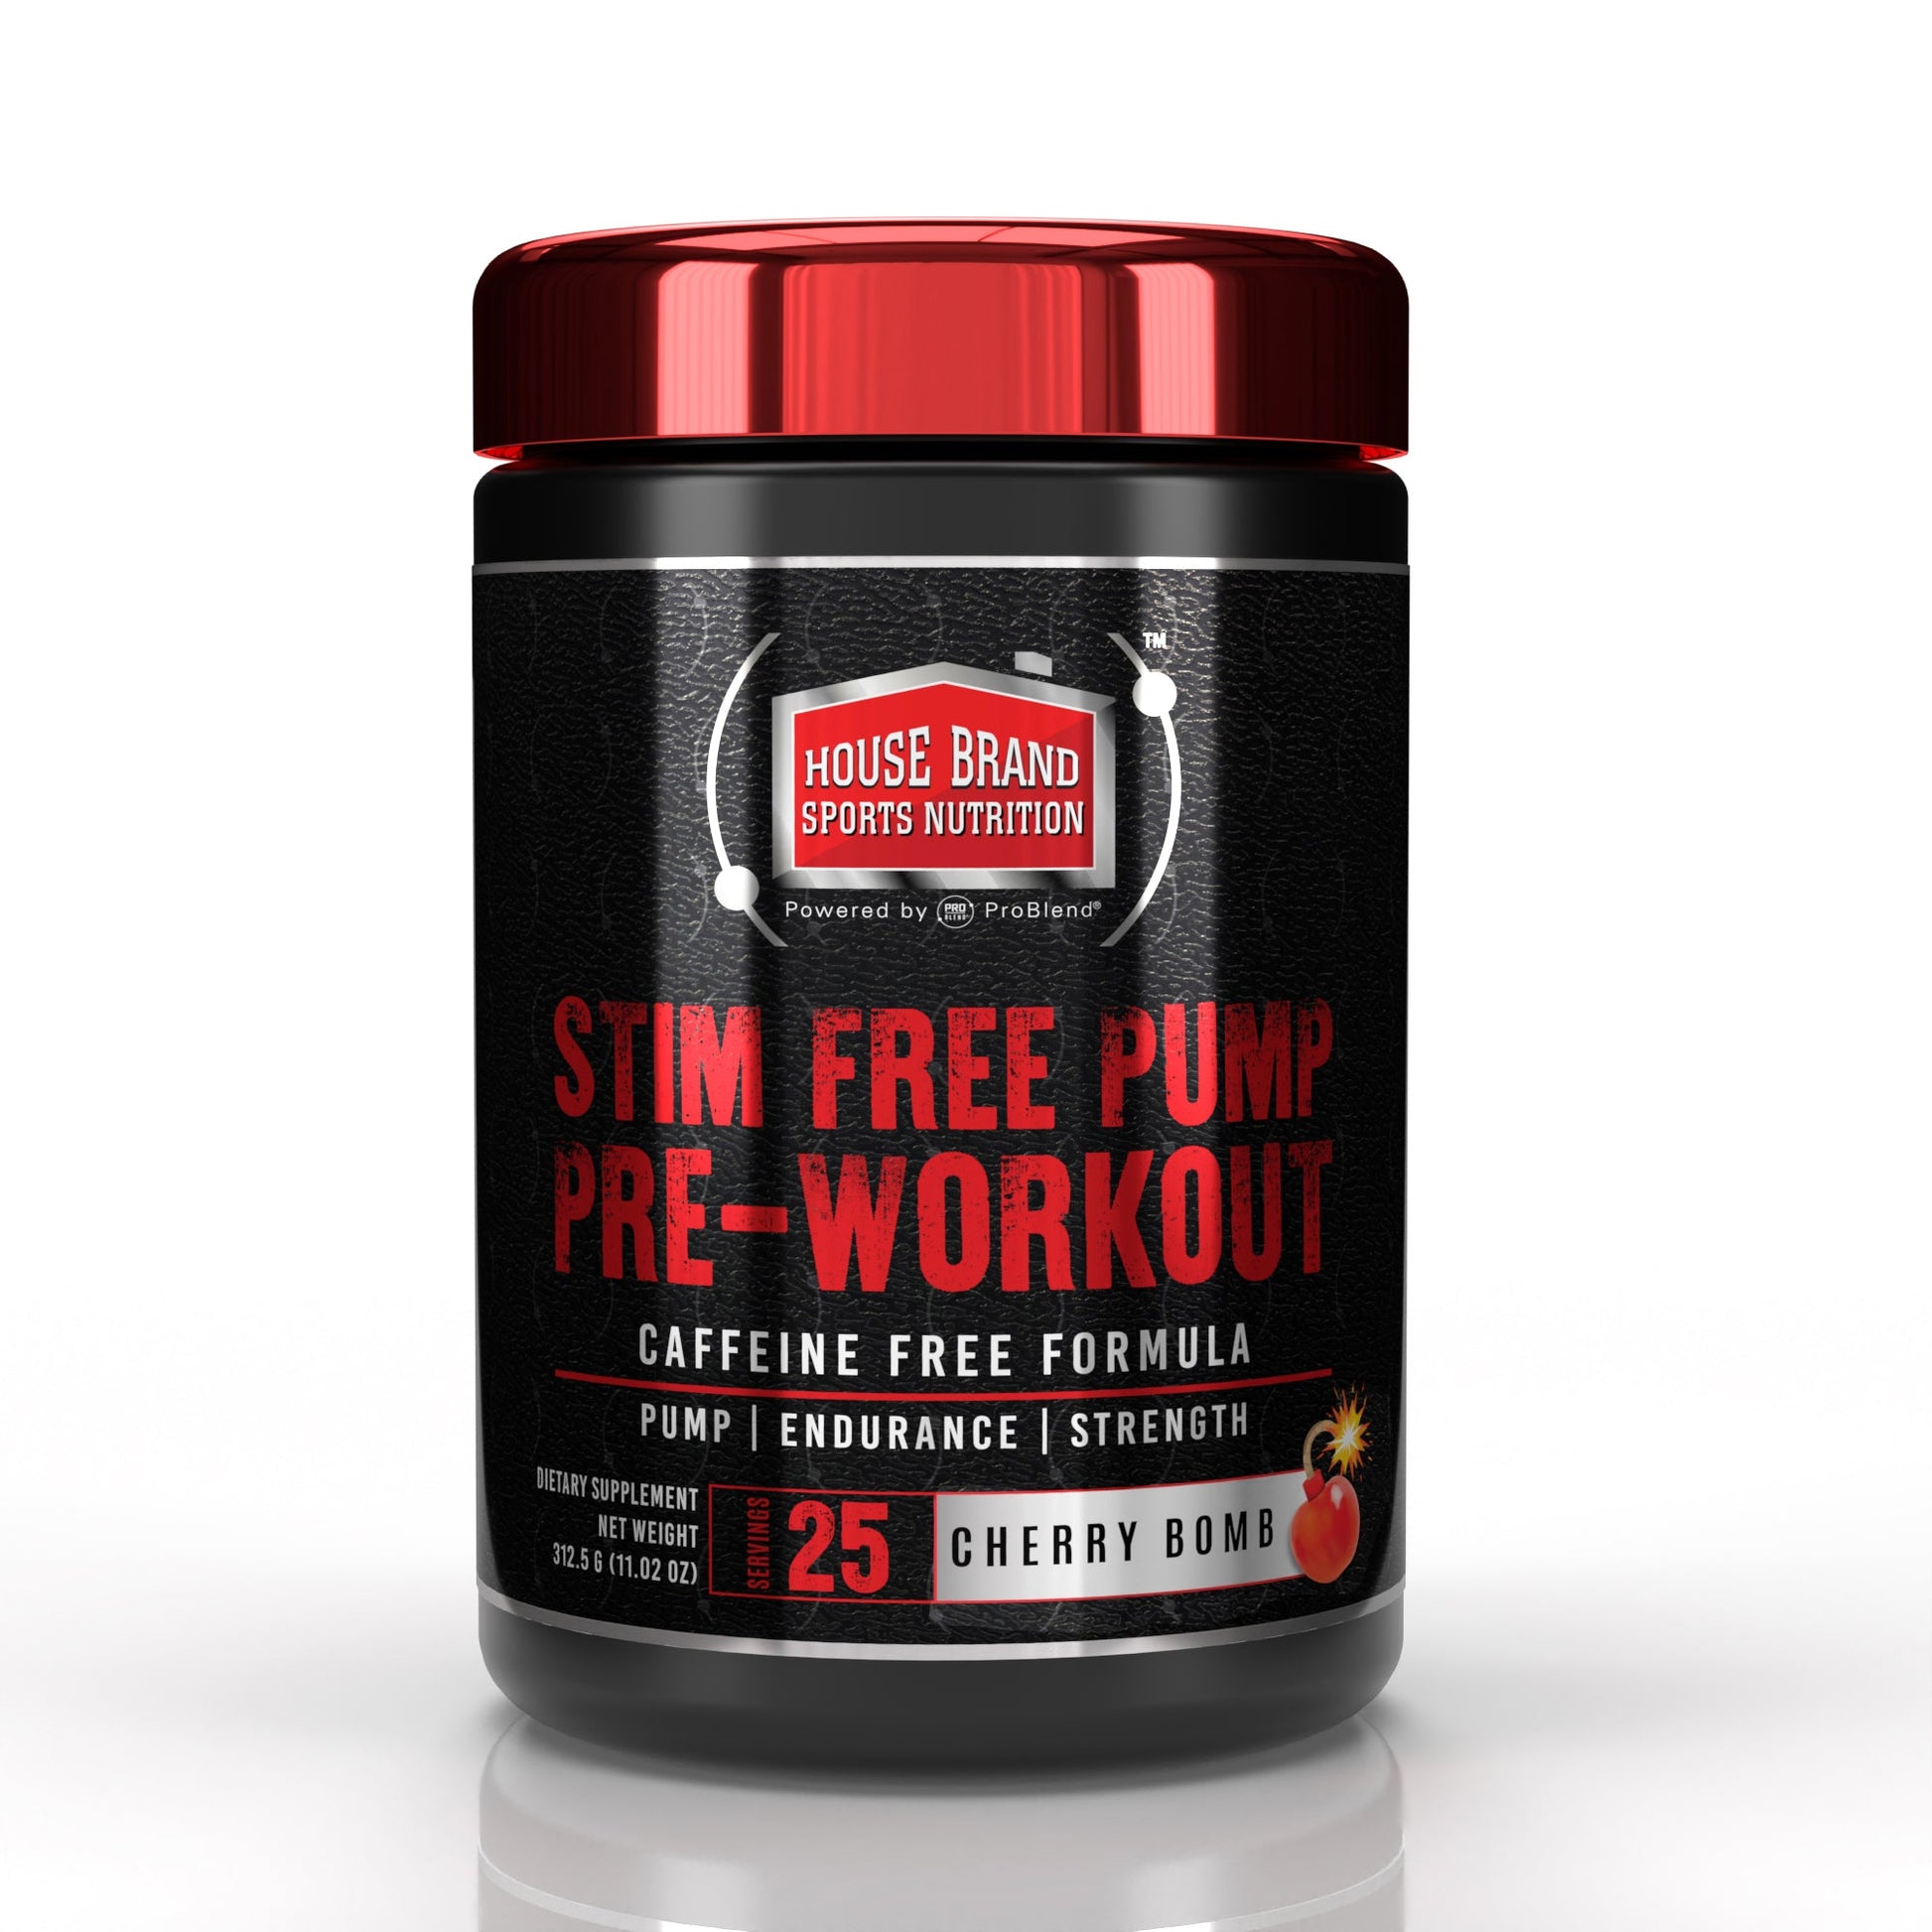 What Are the Benefits of Stim-Free Pre-Workout?